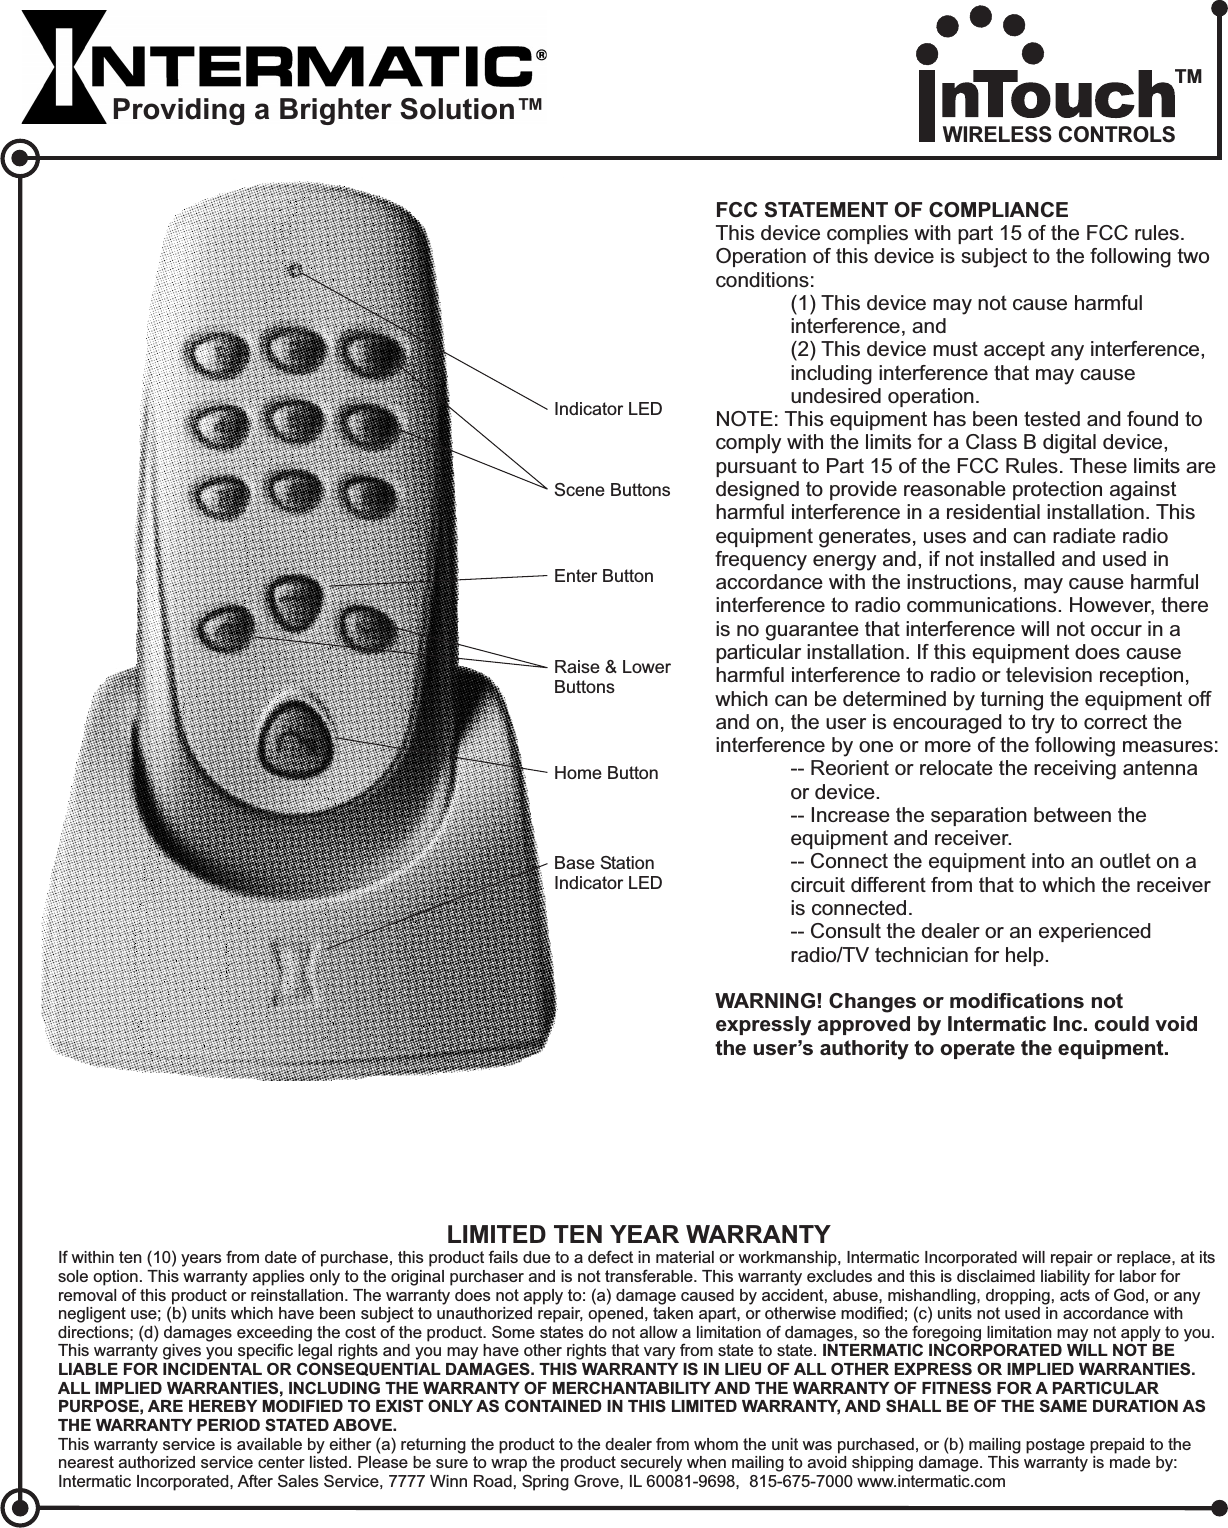 FCC STATEMENT OF COMPLIANCEWARNING! Changes or modifications notexpressly approved by Intermatic Inc. could voidthe user’s authority to operate the equipment.This device complies with part 15 of the FCC rules.Operation of this device is subject to the following twoconditions:(1) This device may not cause harmfulinterference, and(2) This device must accept any interference,including interference that may causeundesired operation.NOTE: This equipment has been tested and found tocomply with the limits for a Class B digital device,pursuant to Part 15 of the FCC Rules. These limits aredesigned to provide reasonable protection againstharmful interference in a residential installation. Thisequipment generates, uses and can radiate radiofrequency energy and, if not installed and used inaccordance with the instructions, may cause harmfulinterference to radio communications. However, thereis no guarantee that interference will not occur in aparticular installation. If this equipment does causeharmful interference to radio or television reception,which can be determined by turning the equipment offand on, the user is encouraged to try to correct theinterference by one or more of the following measures:-- Reorient or relocate the receiving antennaor device.-- Increase the separation between theequipment and receiver.-- Connect the equipment into an outlet on acircuit different from that to which the receiveris connected.-- Consult the dealer or an experiencedradio/TV technician for help.Scene ButtonsHome ButtonEnter ButtonRaise &amp; LowerButtonsBase StationIndicator LEDIndicator LEDLIMITED TEN YEAR WARRANTYIf within ten (10) years from date of purchase, this product fails due to a defect in material or workmanship, Intermatic Incorporated will repair or replace, at itssole option. This warranty applies only to the original purchaser and is not transferable. This warranty excludes and this is disclaimed liability for labor forremoval of this product or reinstallation. The warranty does not apply to: (a) damage caused by accident, abuse, mishandling, dropping, acts of God, or anynegligent use; (b) units which have been subject to unauthorized repair, opened, taken apart, or otherwise modified; (c) units not used in accordance withdirections; (d) damages exceeding the cost of the product. Some states do not allow a limitation of damages, so the foregoing limitation may not apply to you.This warranty gives you specific legal rights and you may have other rights that vary from state to state.This warranty service is available by either (a) returning the product to the dealer from whom the unit was purchased, or (b) mailing postage prepaid to thenearest authorized service center listed. Please be sure to wrap the product securely when mailing to avoid shipping damage. This warranty is made by:Intermatic Incorporated, After Sales Service, 7777 Winn Road, Spring Grove, IL 60081-9698, 815-675-7000 www.intermatic.comINTERMATIC INCORPORATED WILL NOT BELIABLE FOR INCIDENTAL OR CONSEQUENTIAL DAMAGES. THIS WARRANTY IS IN LIEU OF ALL OTHER EXPRESS OR IMPLIED WARRANTIES.ALL IMPLIED WARRANTIES, INCLUDING THE WARRANTY OF MERCHANTABILITY AND THE WARRANTY OF FITNESS FOR A PARTICULARPURPOSE, ARE HEREBY MODIFIED TO EXIST ONLY AS CONTAINED IN THIS LIMITED WARRANTY, AND SHALL BE OF THE SAME DURATION ASTHE WARRANTY PERIOD STATED ABOVE.Providing a Brighter Solution™WIRELESS CONTROLSTM